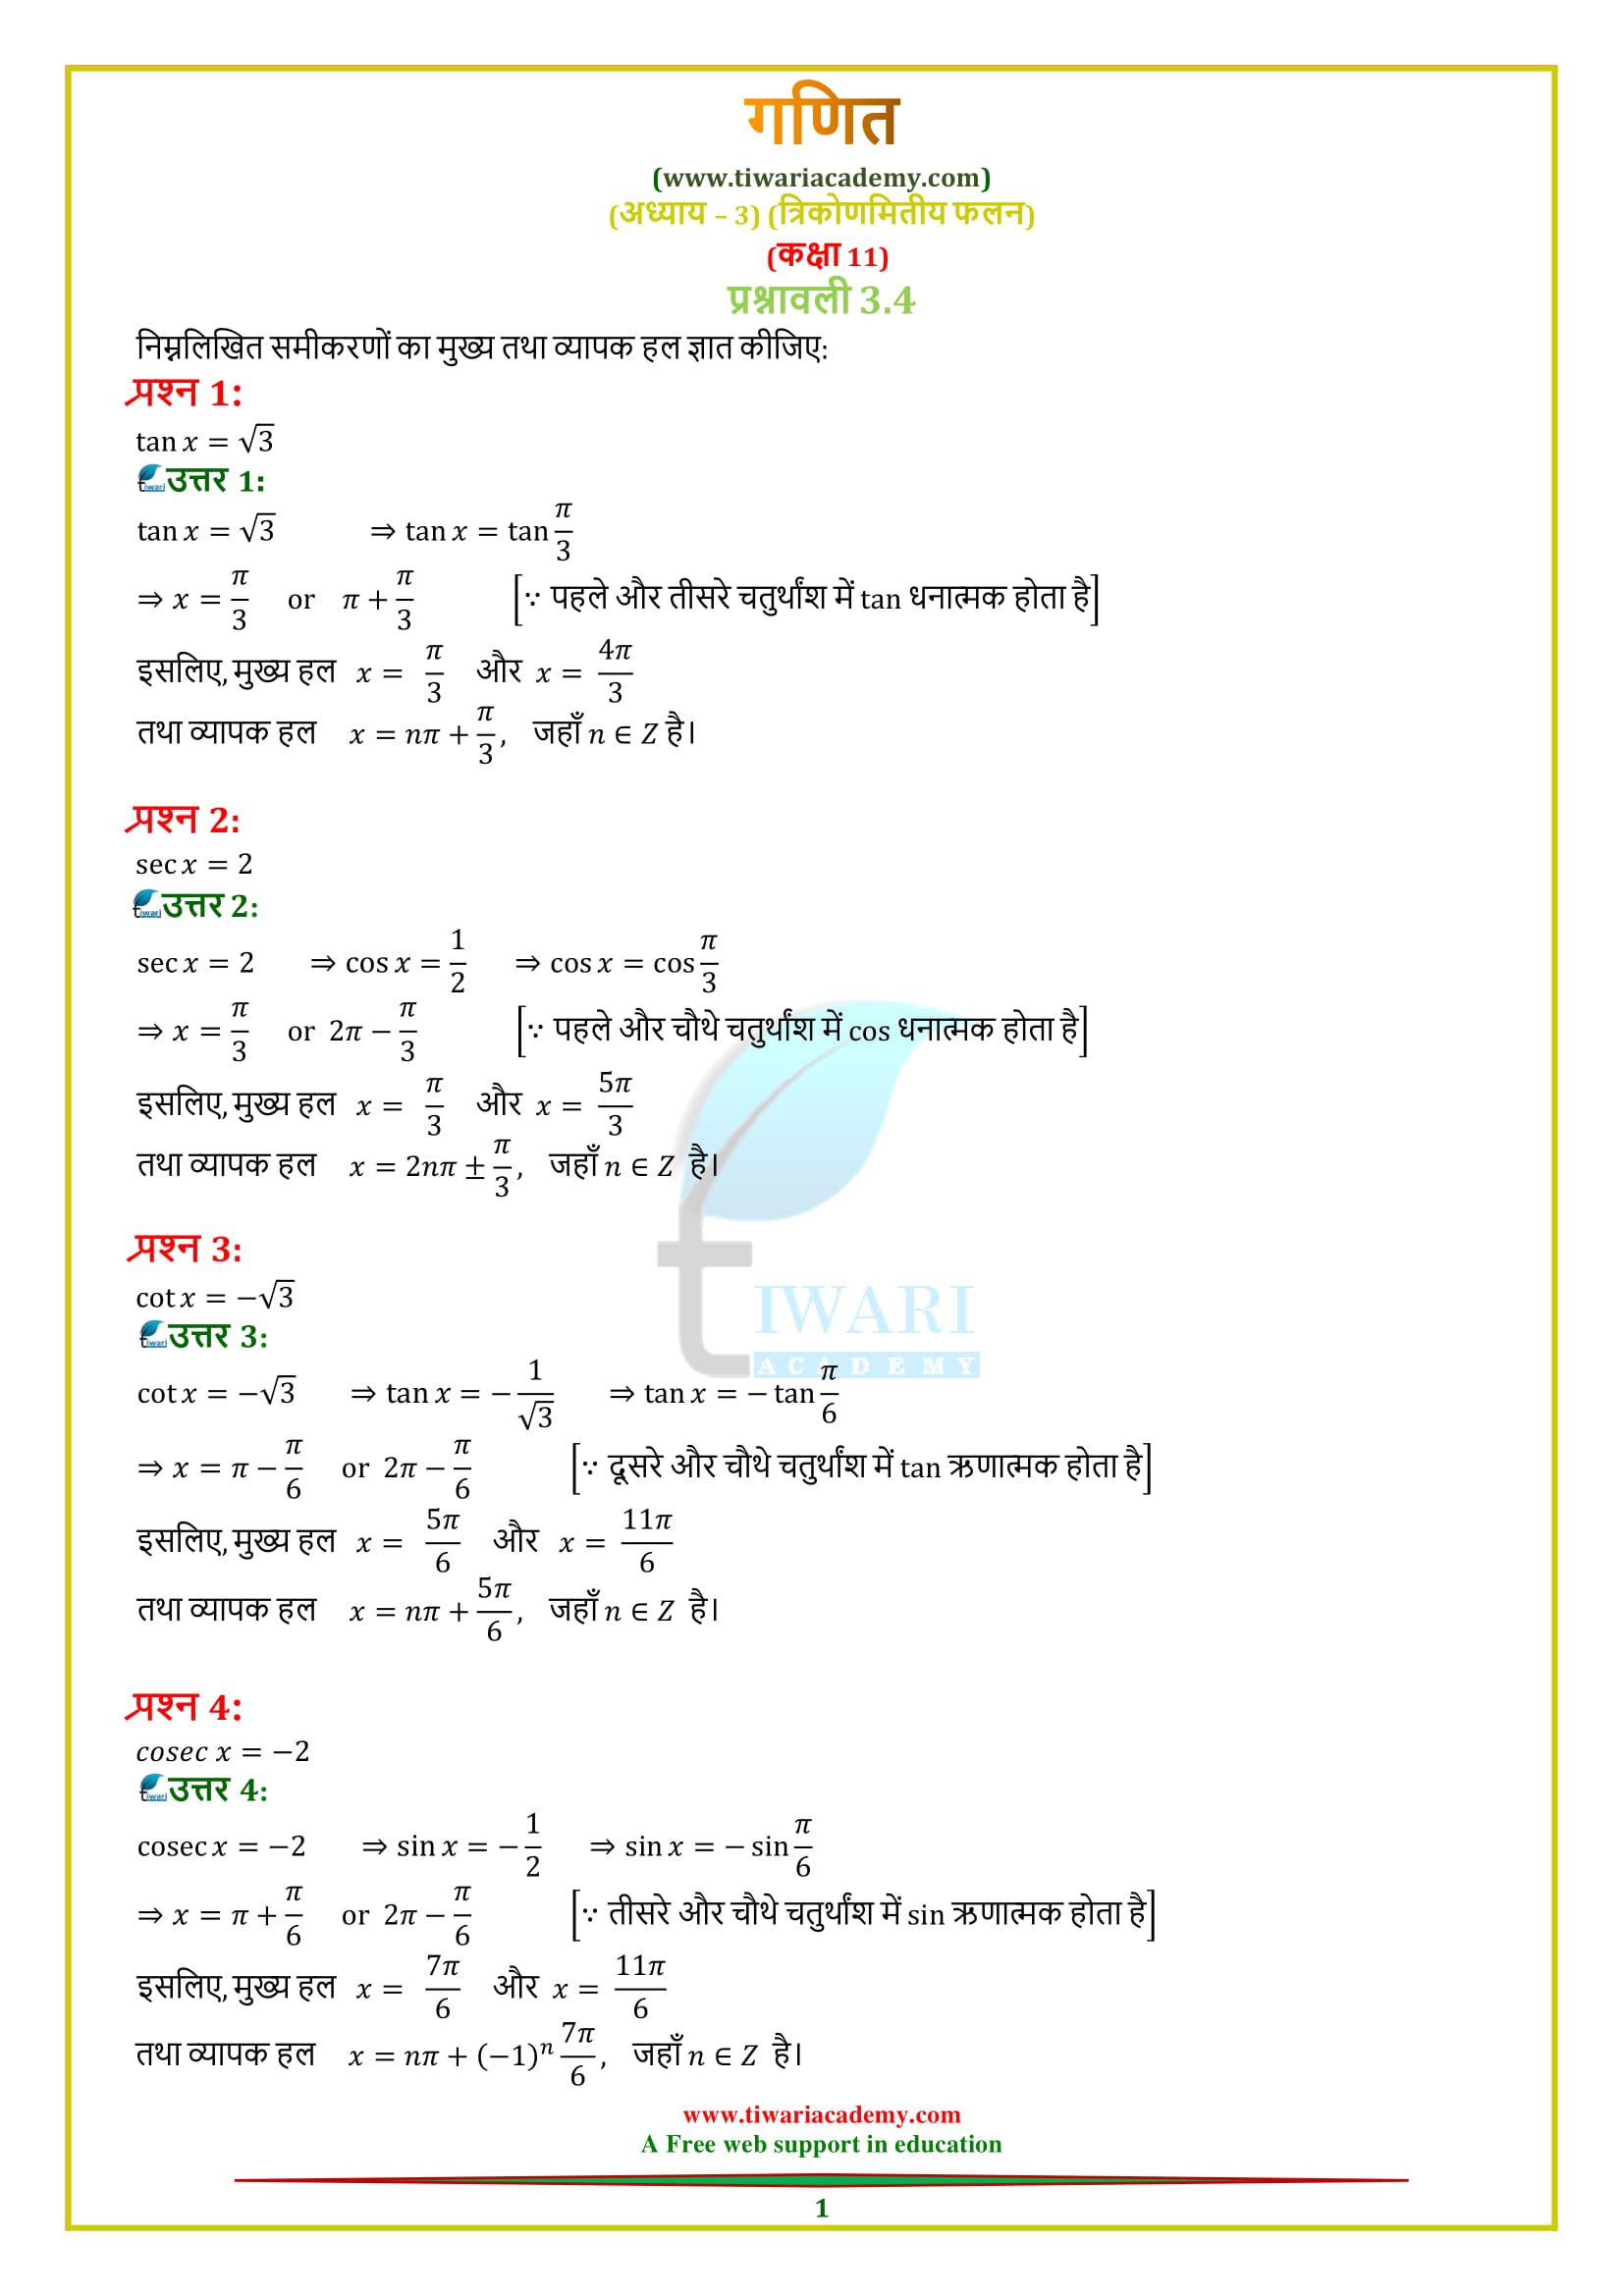 NCERT Solutions for Class 11 Maths Chapter 3 Exercise 3.4 in Hindi medium